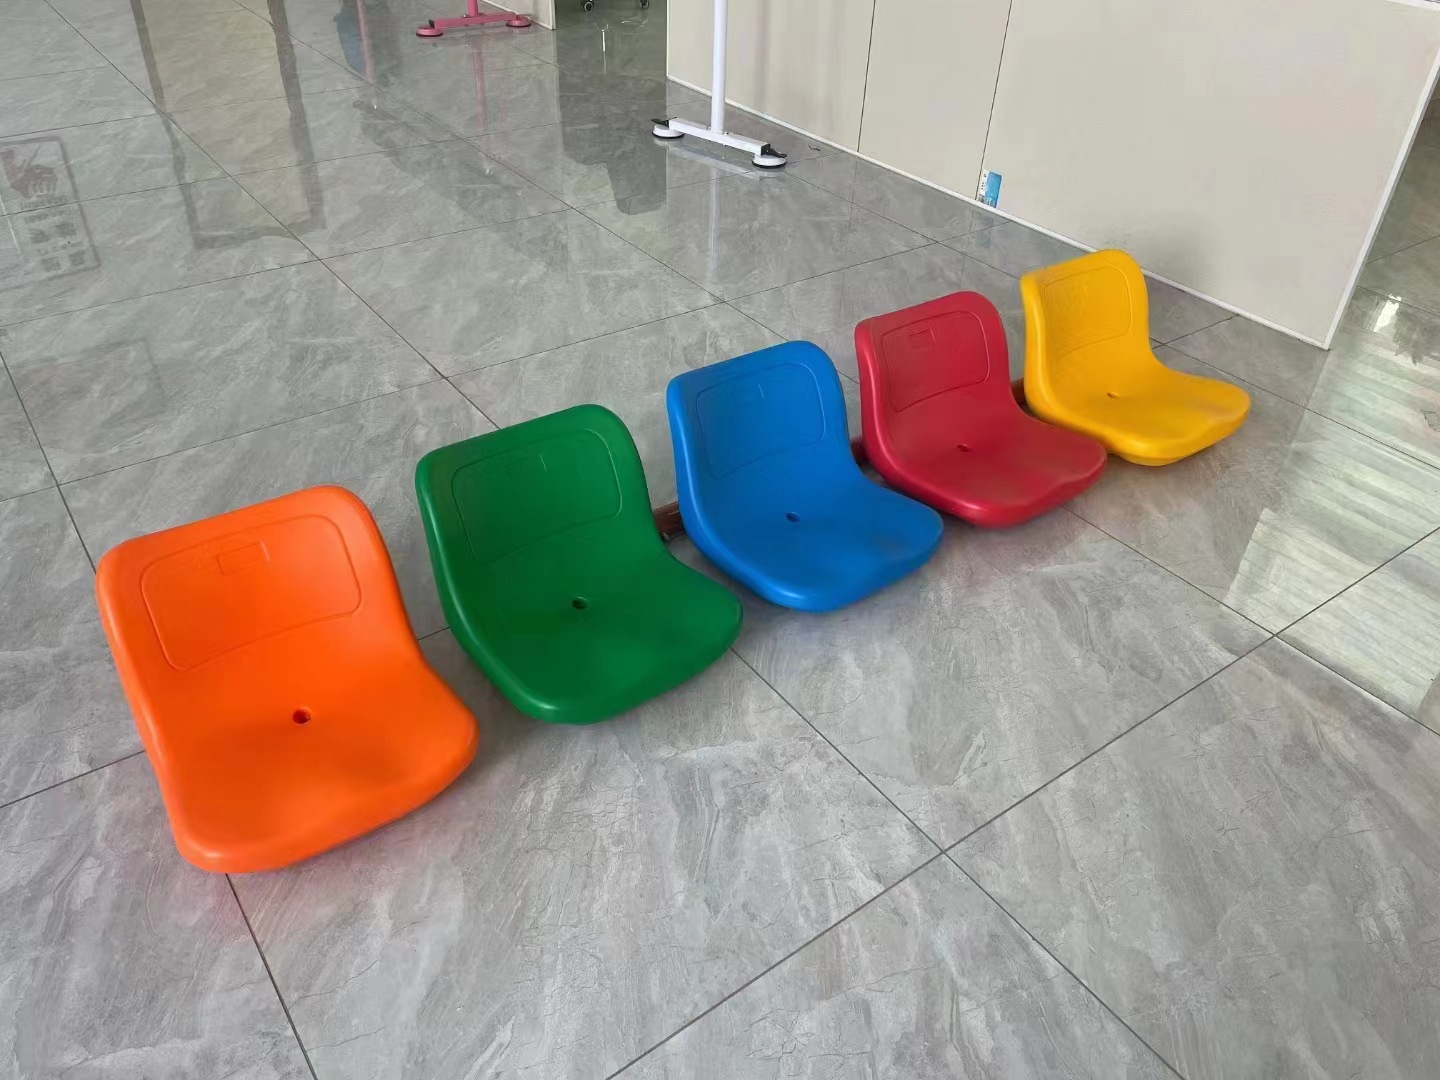 Fixing Seat Stadium Extended Stand Low Backrest Electric Manual Fixed Audience Indoor Stand Seat Manufacturer